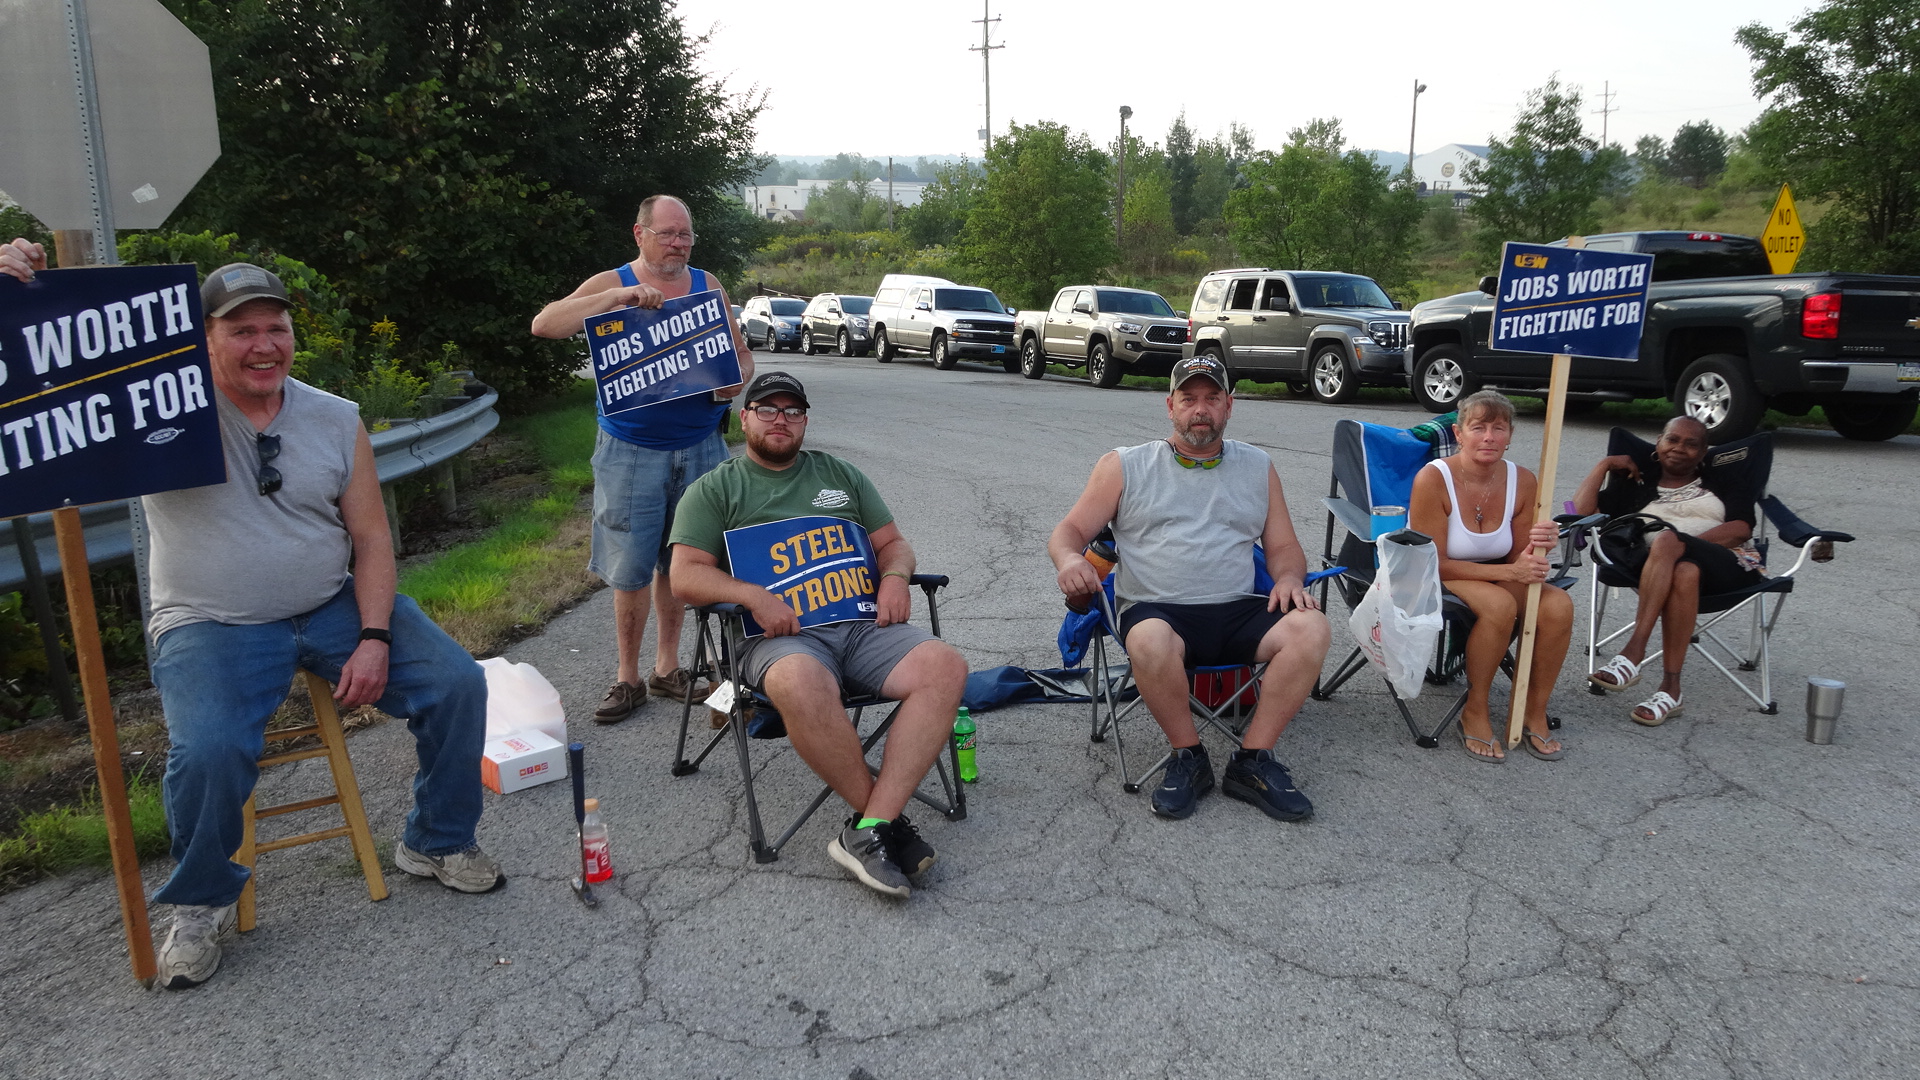 Bill Fragle of Hermitage, a former Roemer Industries employee, shown standing, supports current employees who are, from left, Richard Ellison of Sharpsville, Matthew Mulligan of Brookfield, Kurt Wedge of Burghill, Therese Smith of West Middlesex and Sandra Evans of Youngstown.